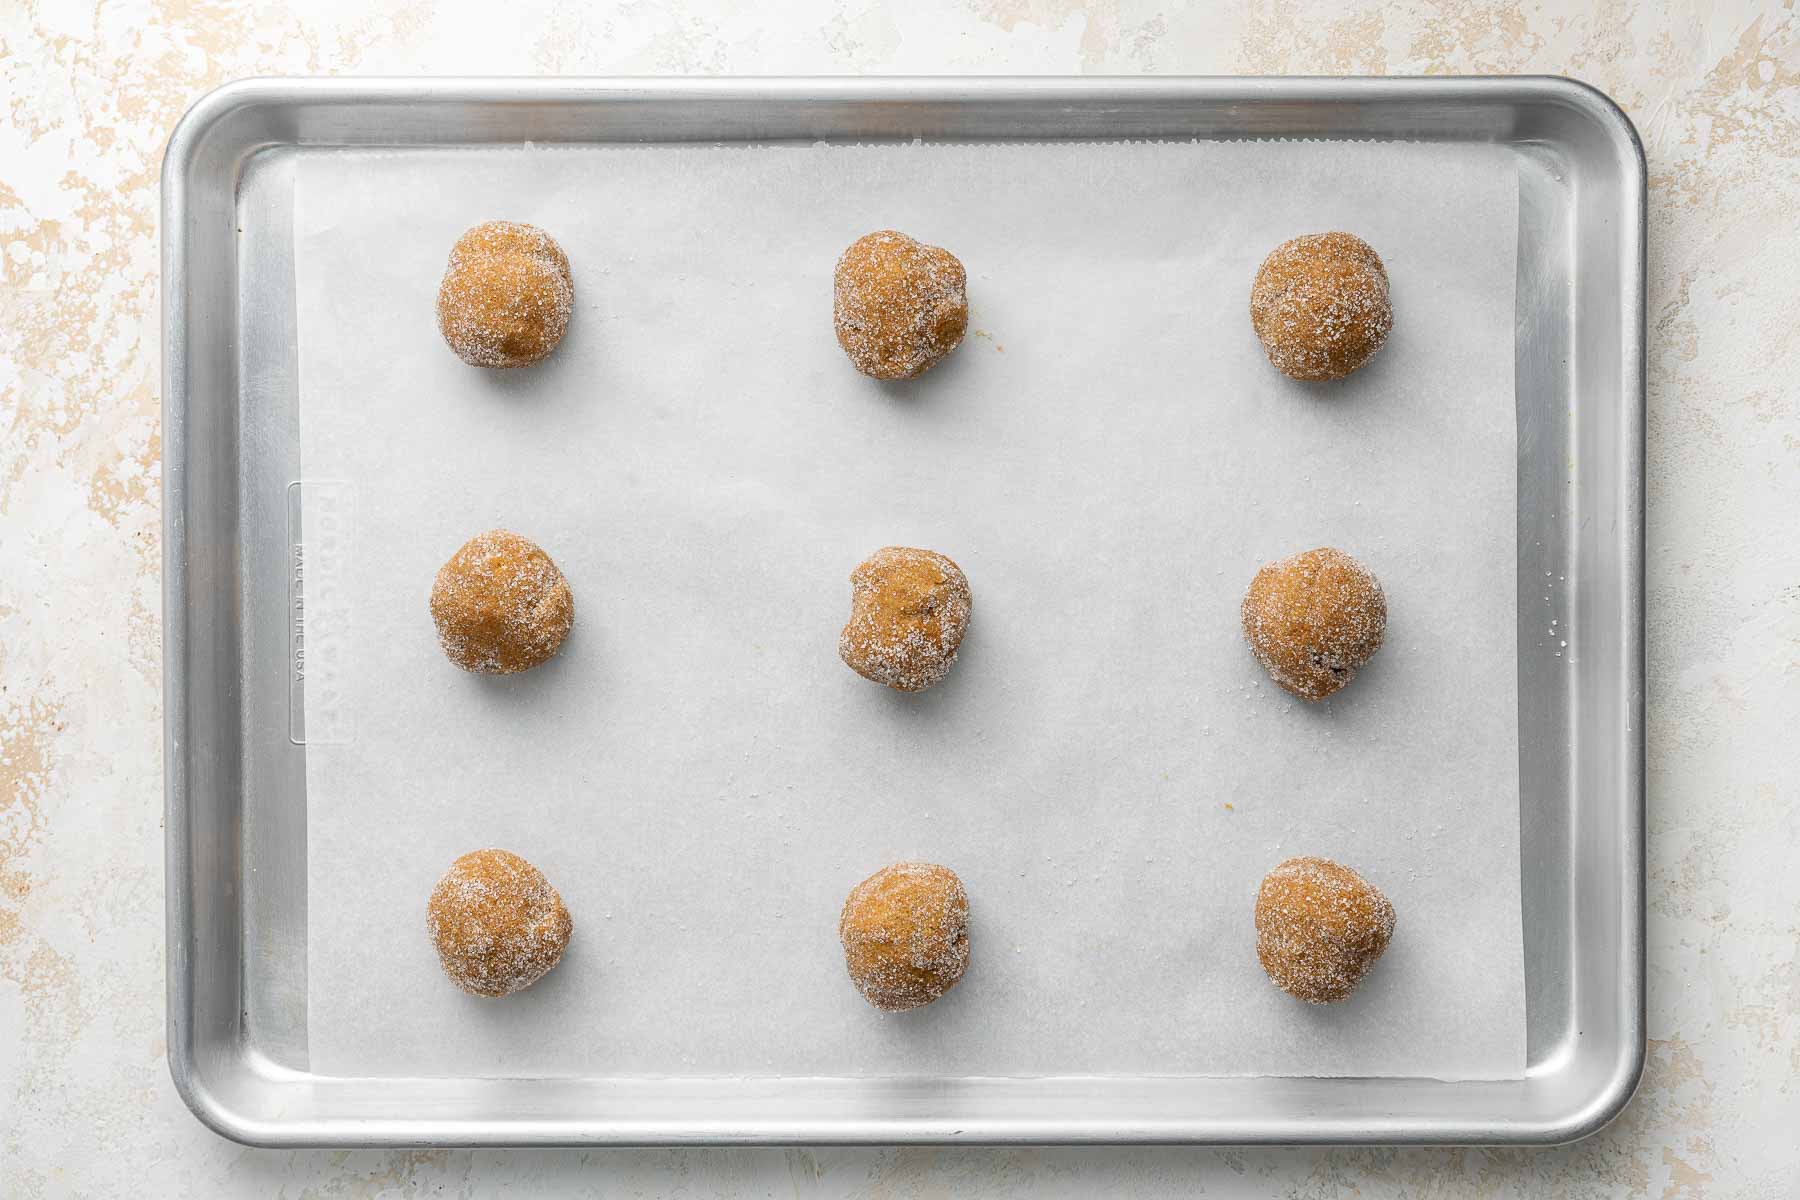 Nine dough balls on a baking sheet before being baked.